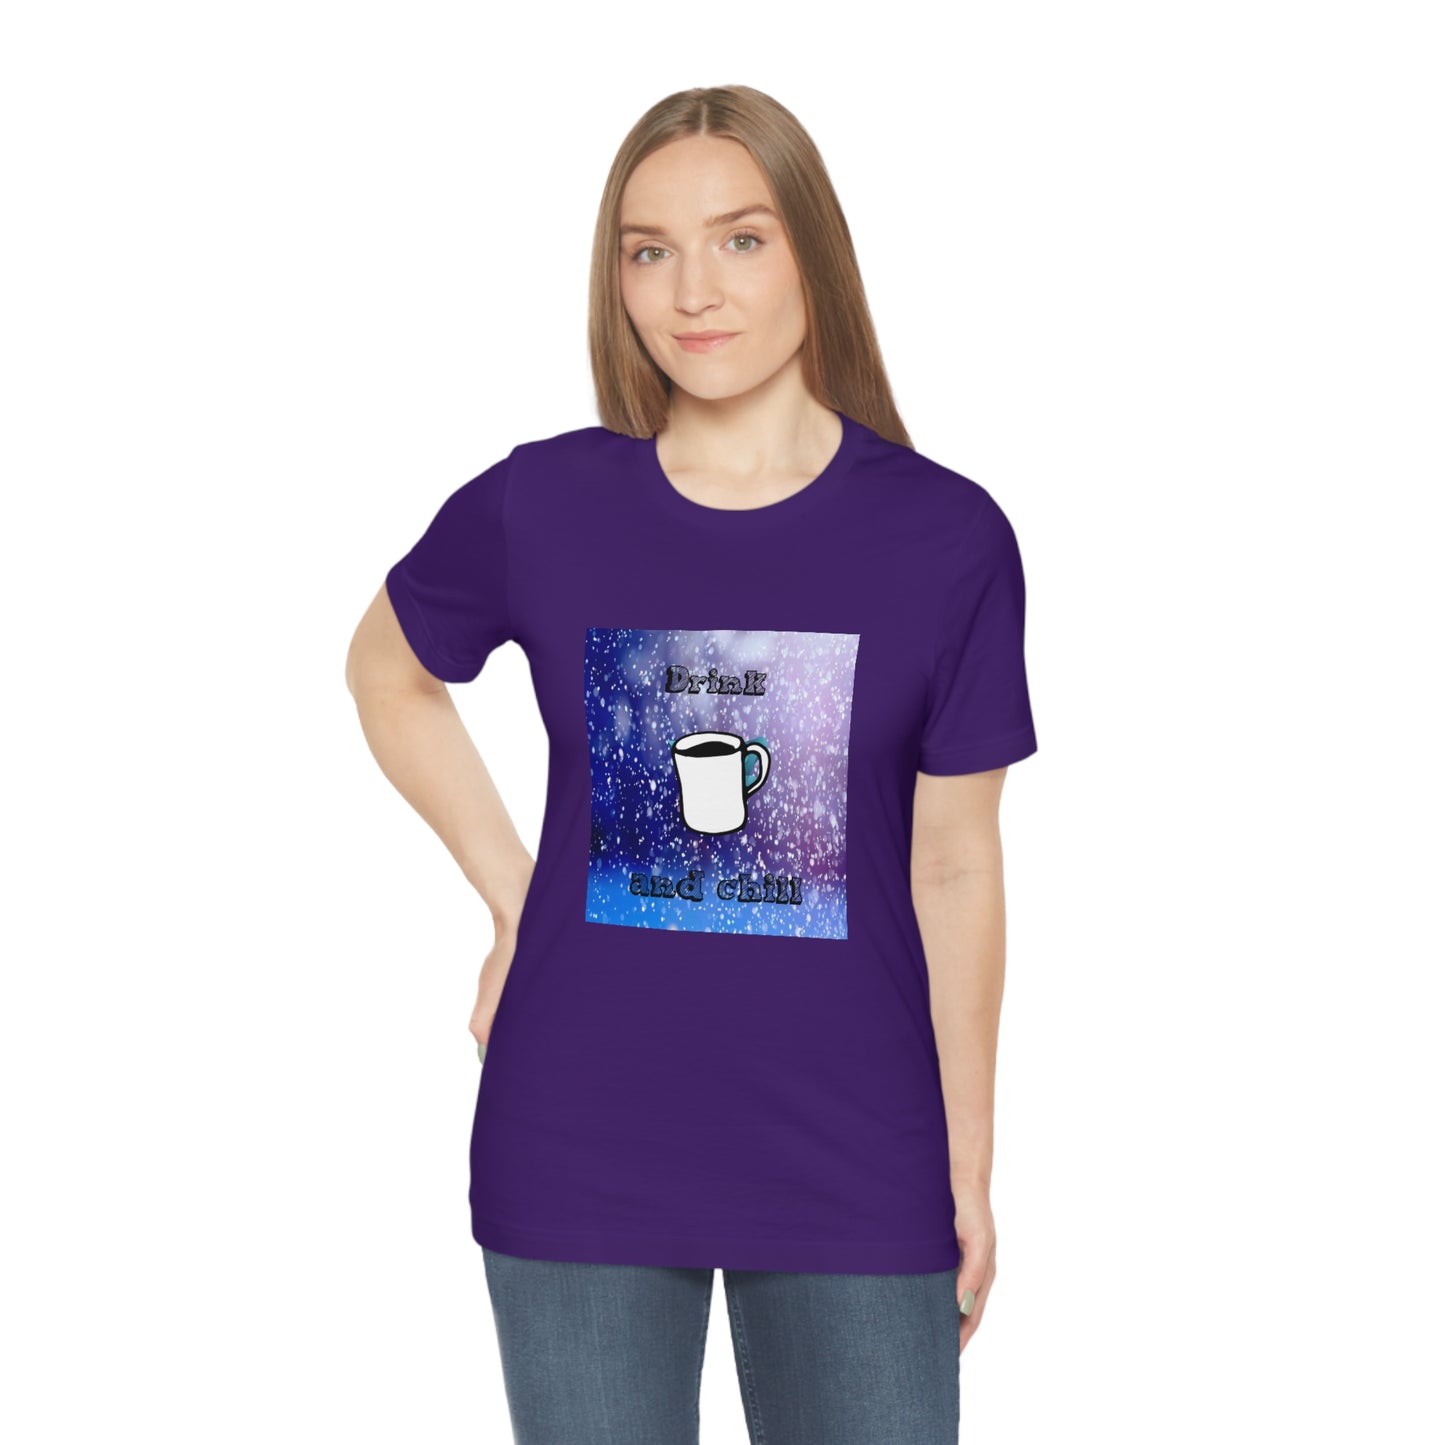 Drink coffee and chill - Funny Designed - Unisex Short Sleeve Tee